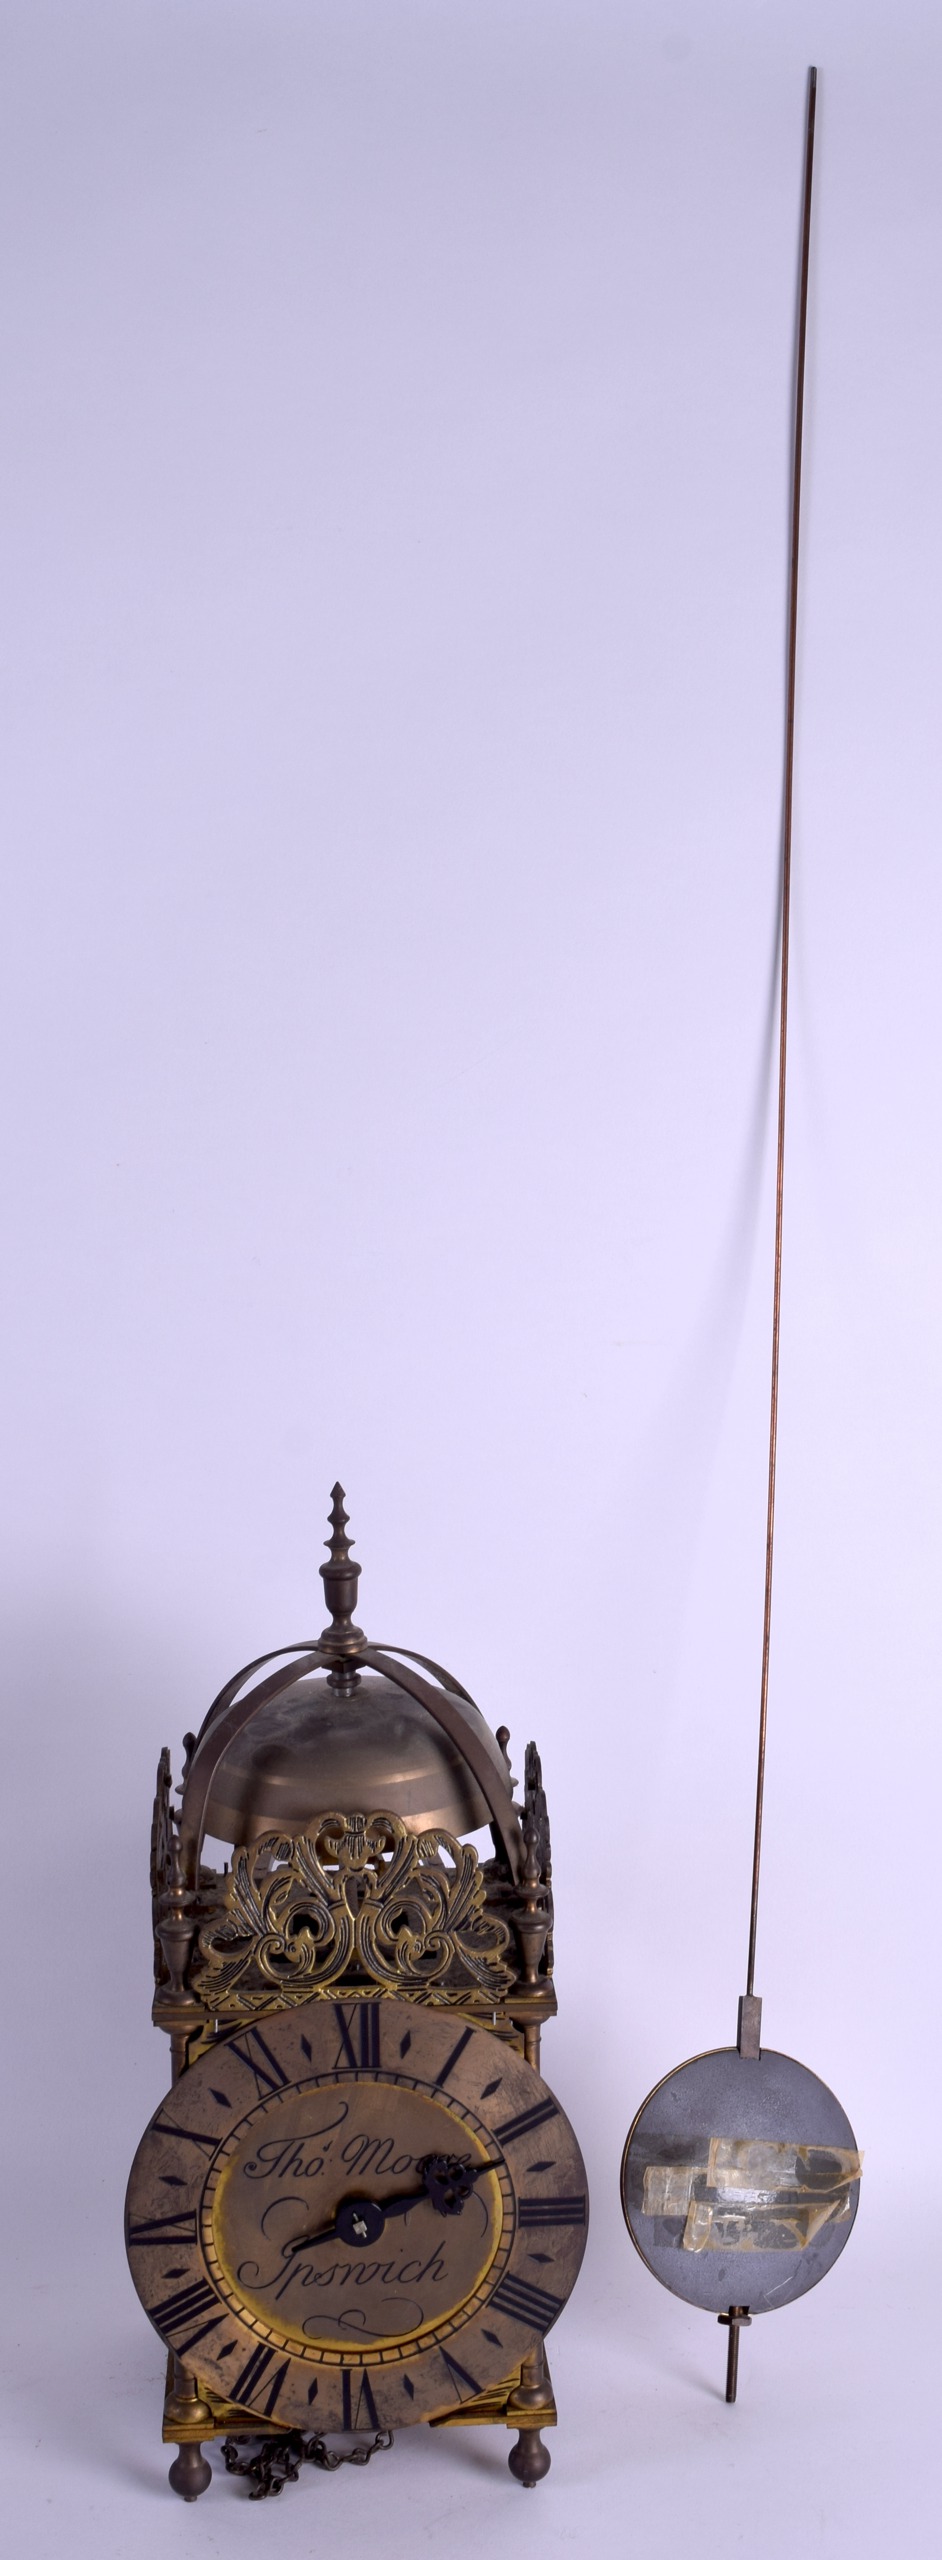 A BRASS LANTERN CLOCK by Thomas Moore of Ipswich, decorated with open work foliage. 37 cm x 15 cm. - Image 6 of 6